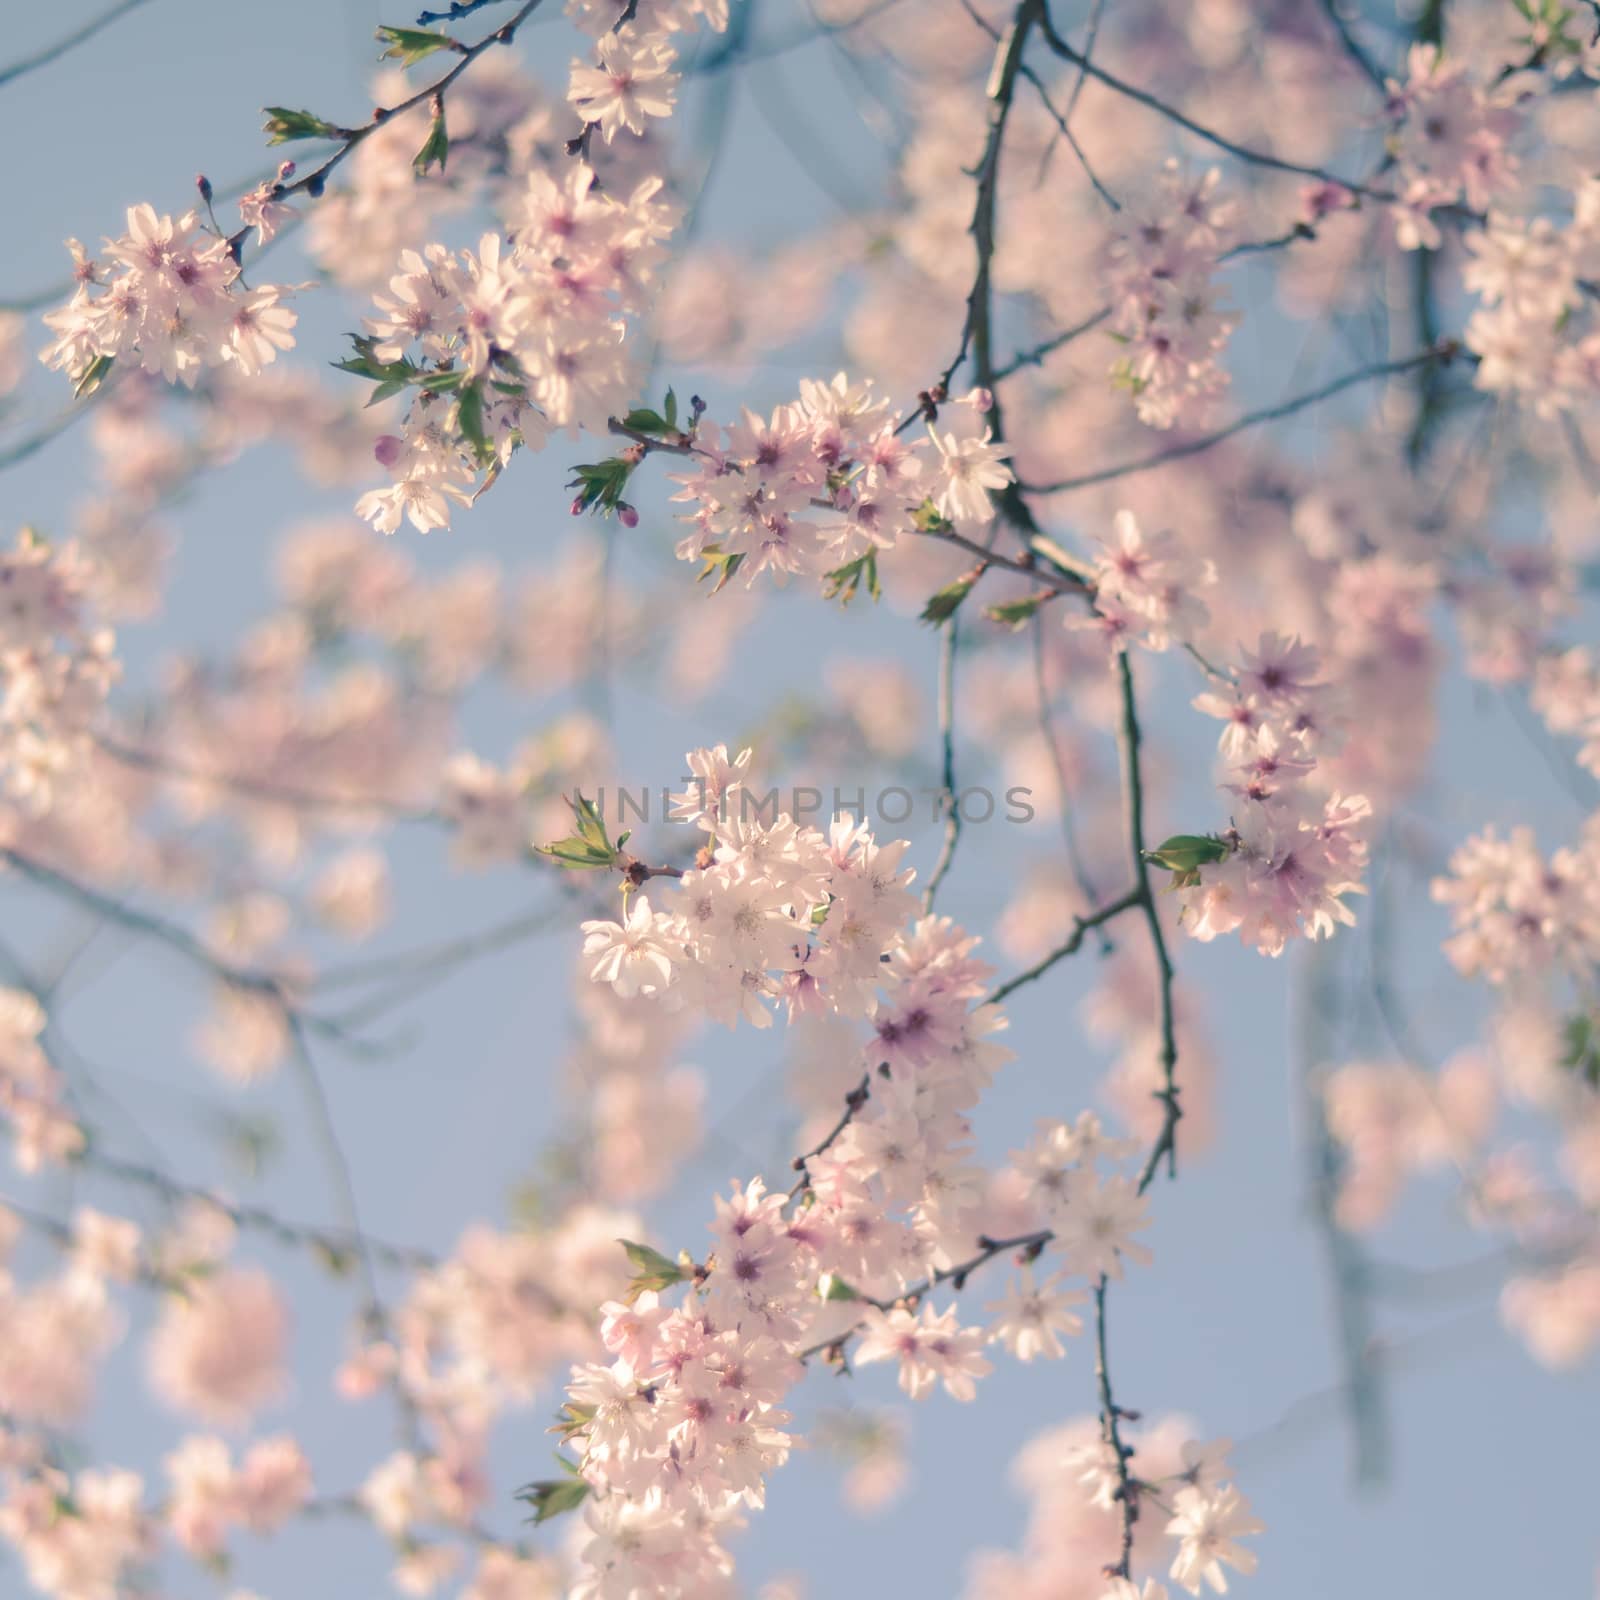 Pastel Retro Filter Pink Cherry Blossom Flowers For Spring (With Shallow DoF)